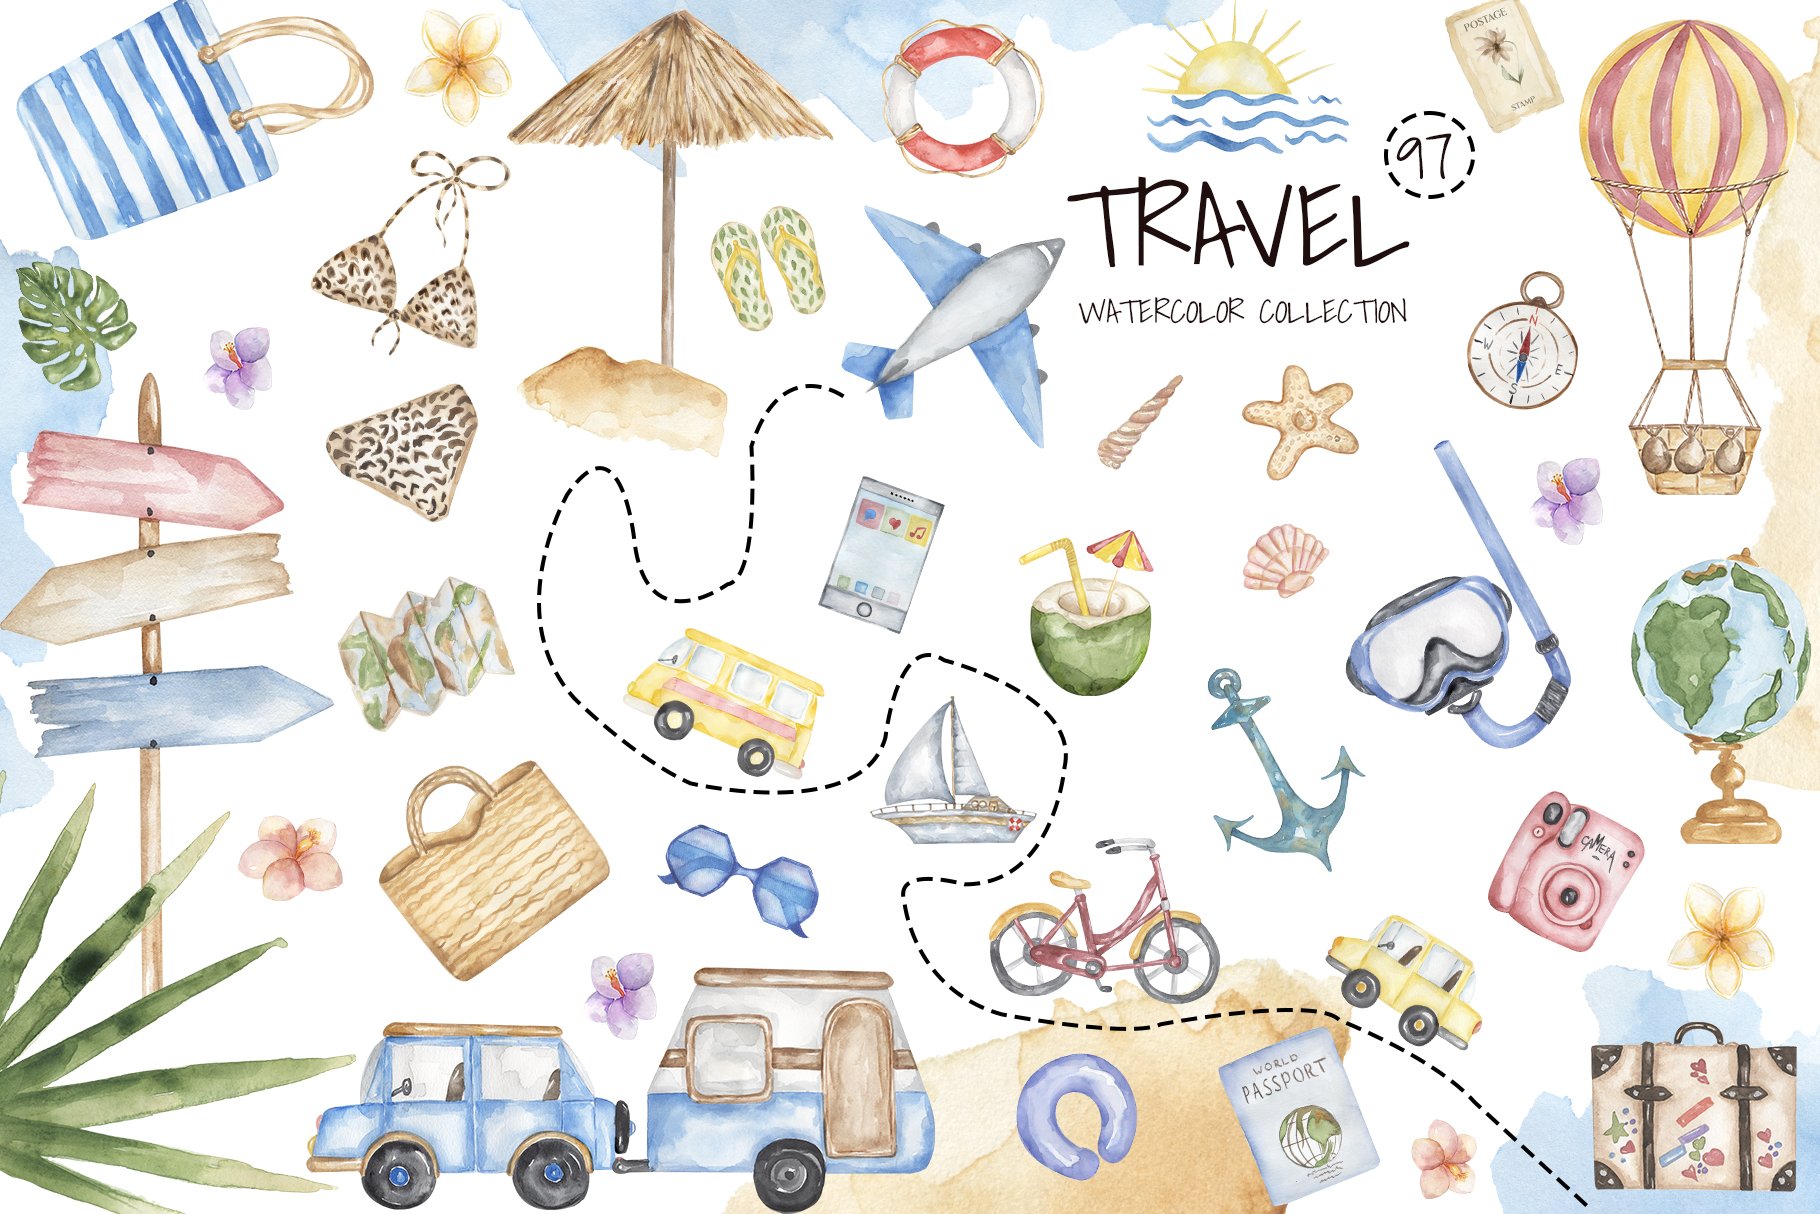 Watercolor Travel Clipart